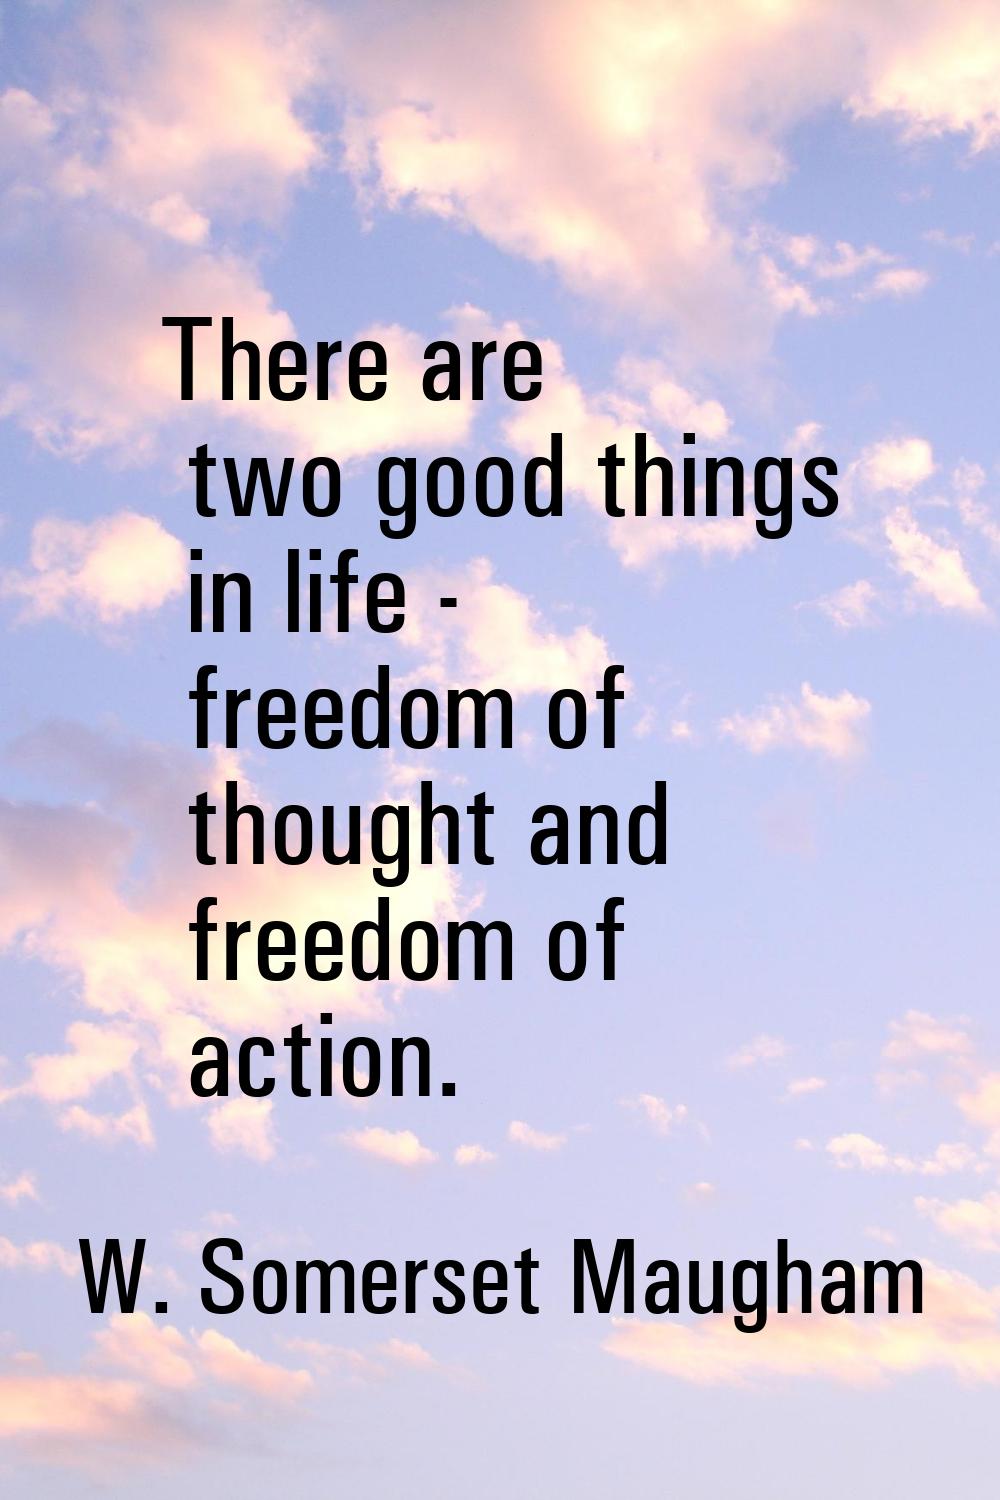 There are two good things in life - freedom of thought and freedom of action.